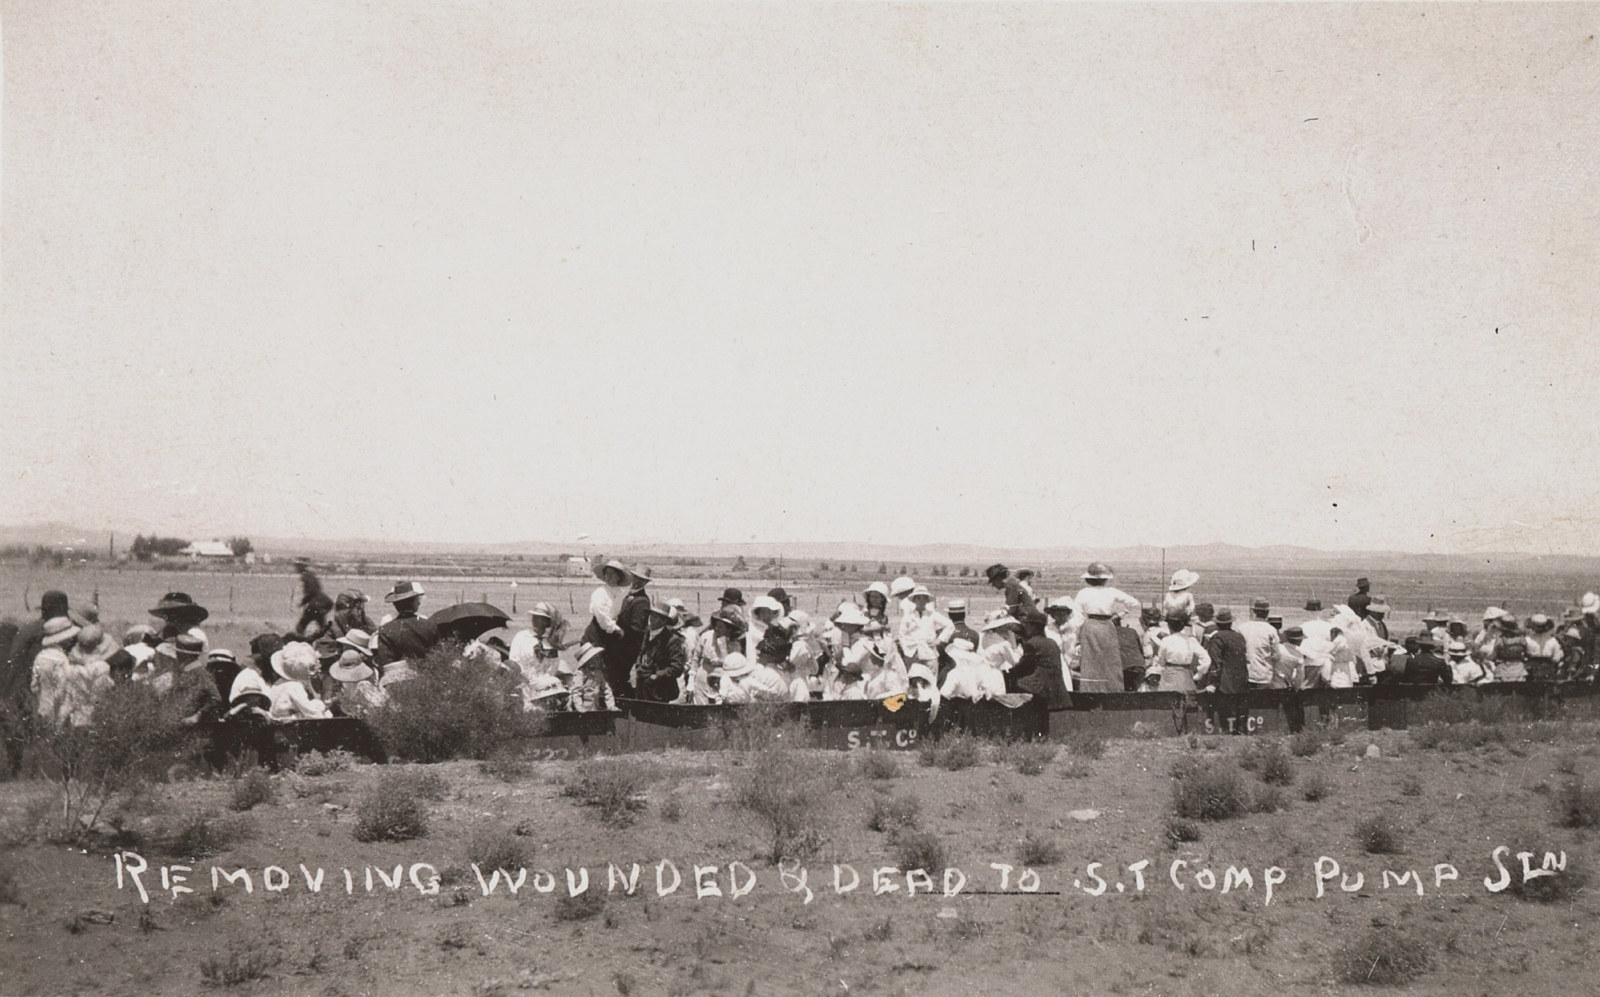 'Battle of Broken Hill' 1 January 1915: 'Removing wounded & dead to S.T. Comp Pump Stn' (Silverton Tranway Company)